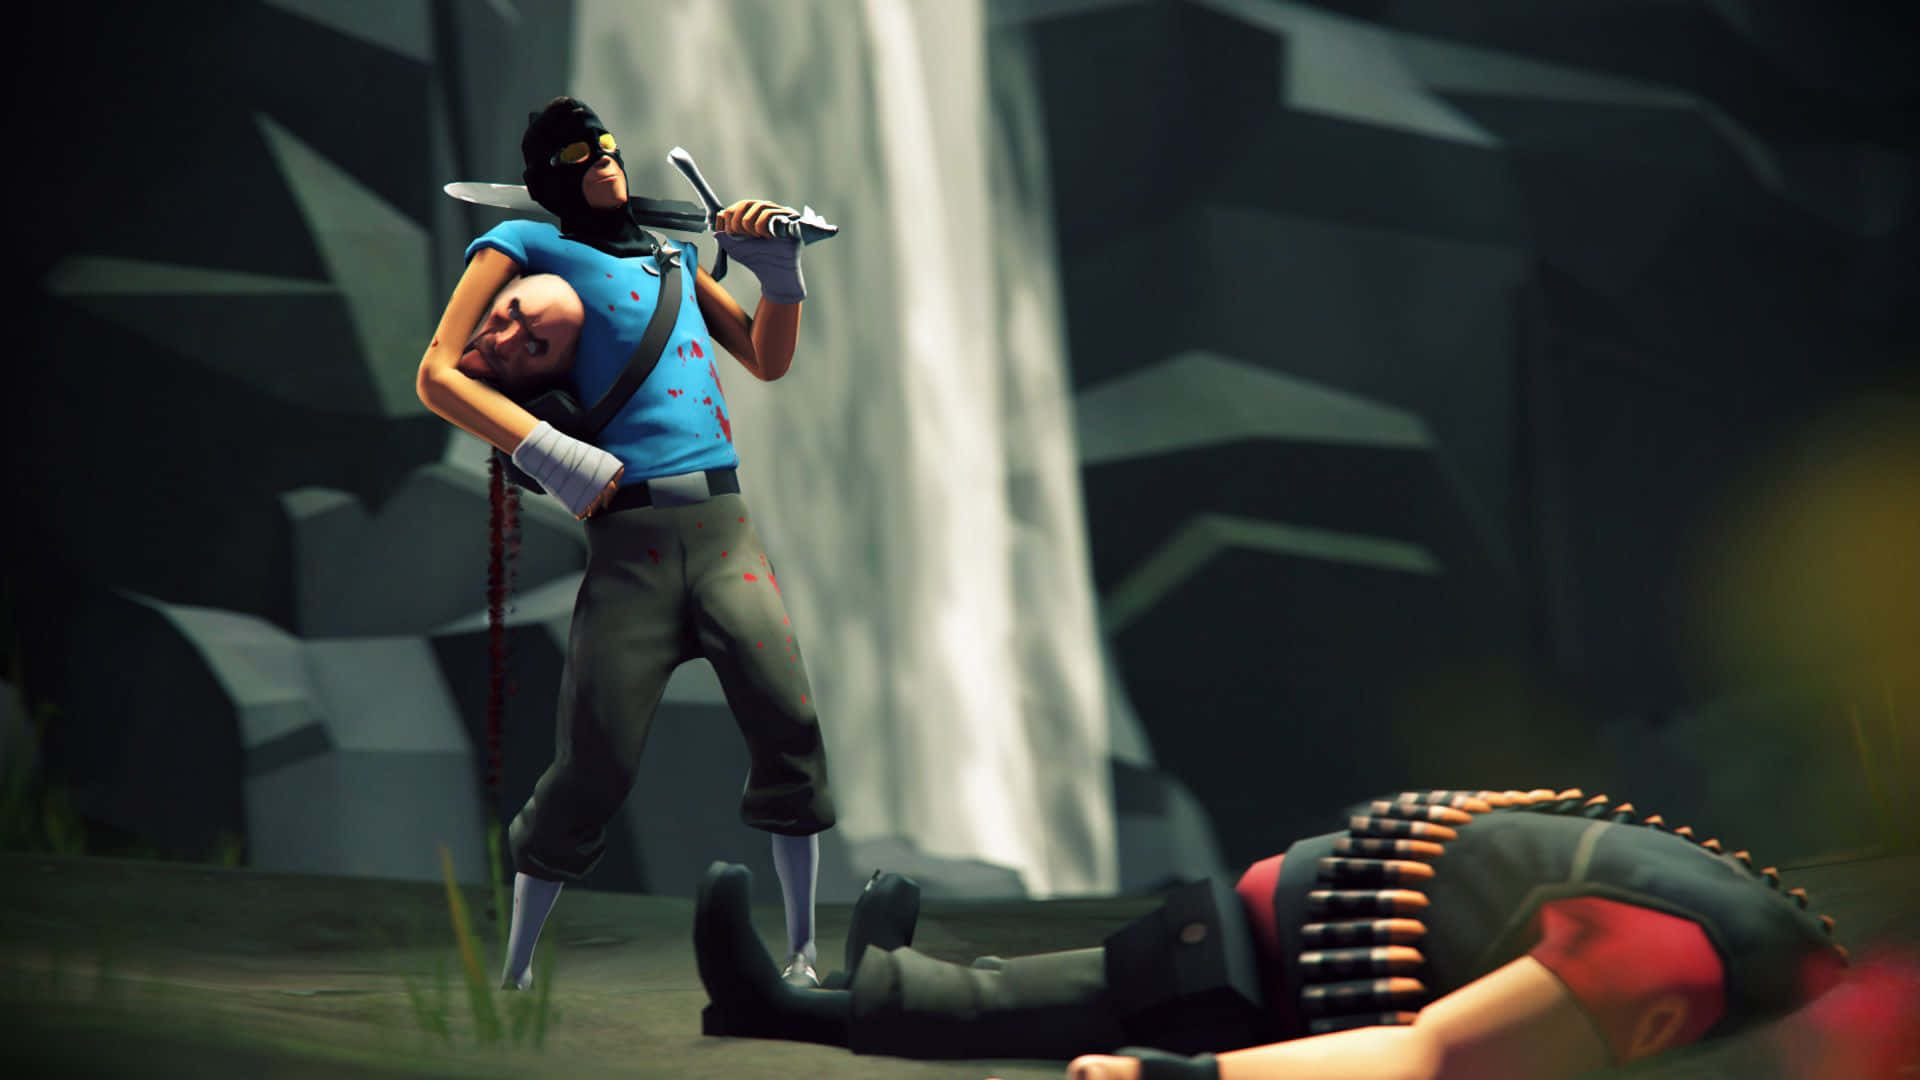 The Exciting Cast of Team Fortress 2 Characters Wallpaper